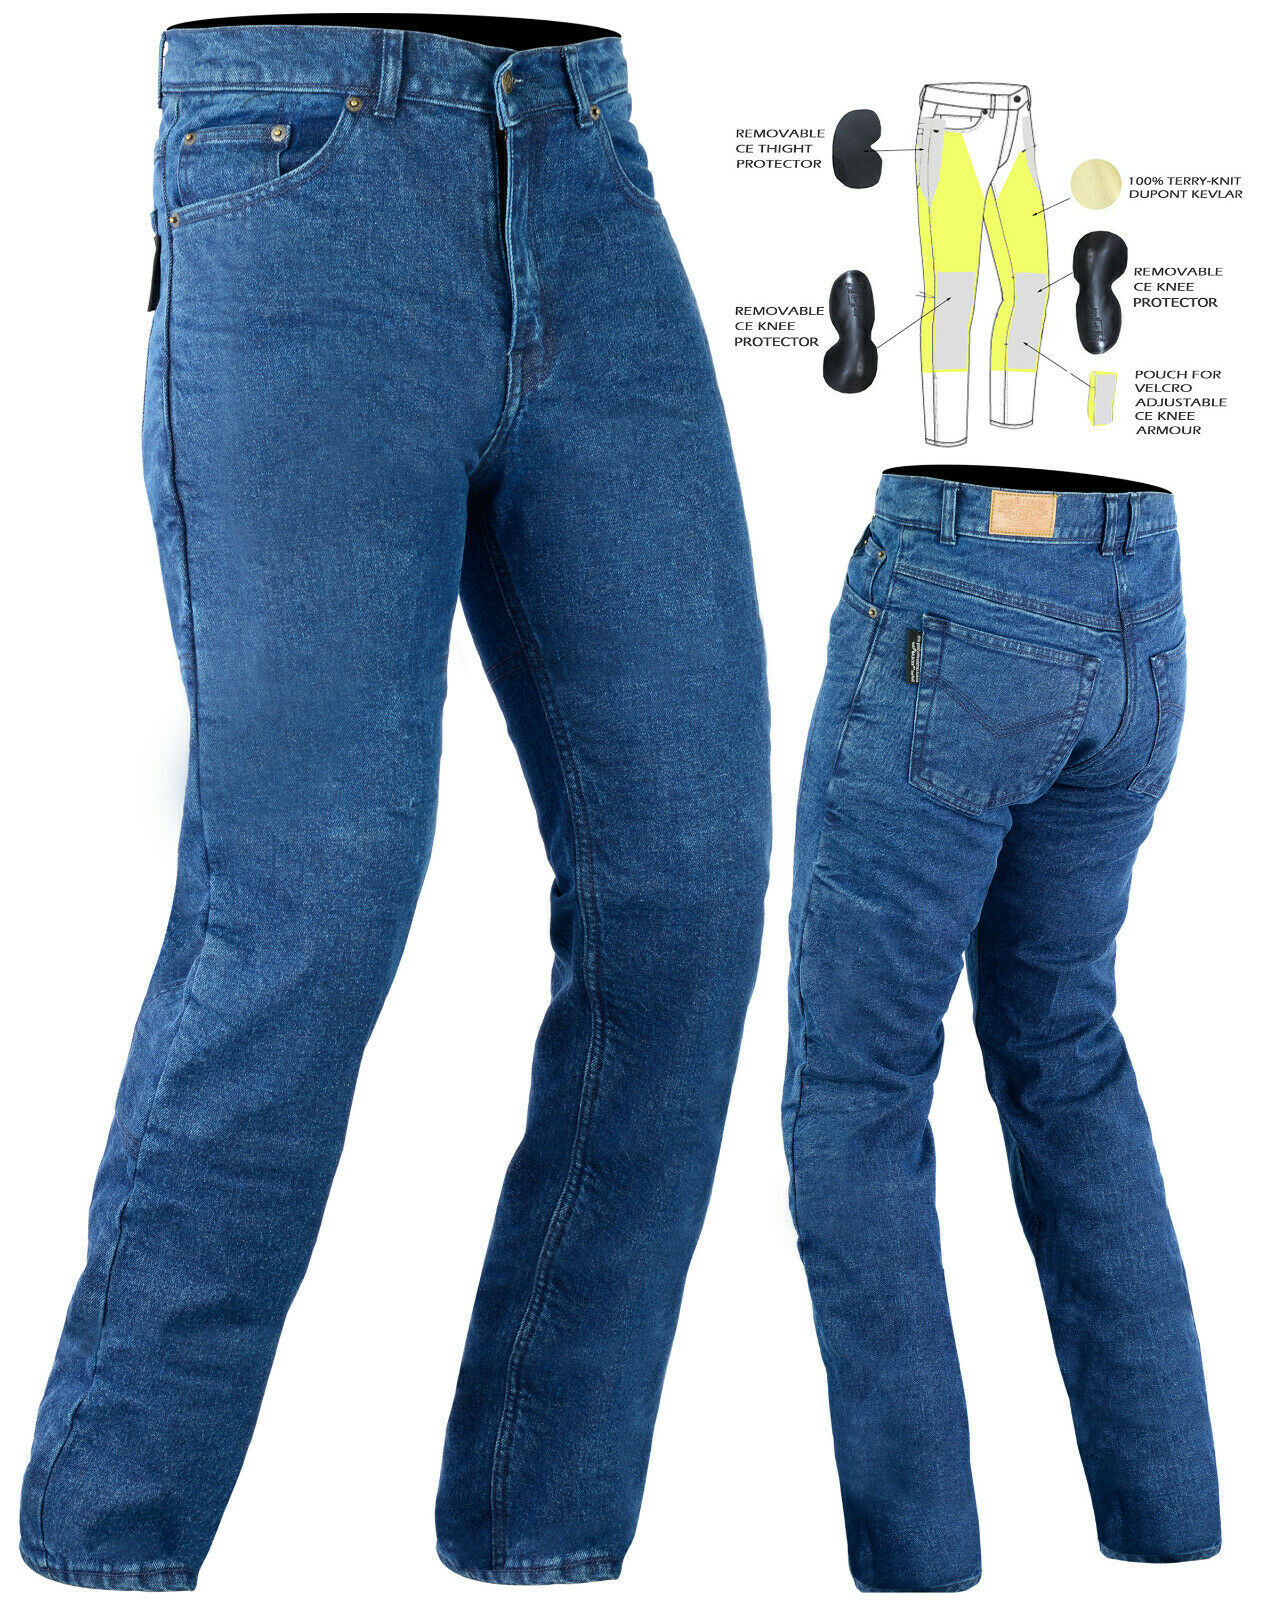 The Best Motorcycle Jeans To Keep You Safe And Look Stylish  Motorcyclecom